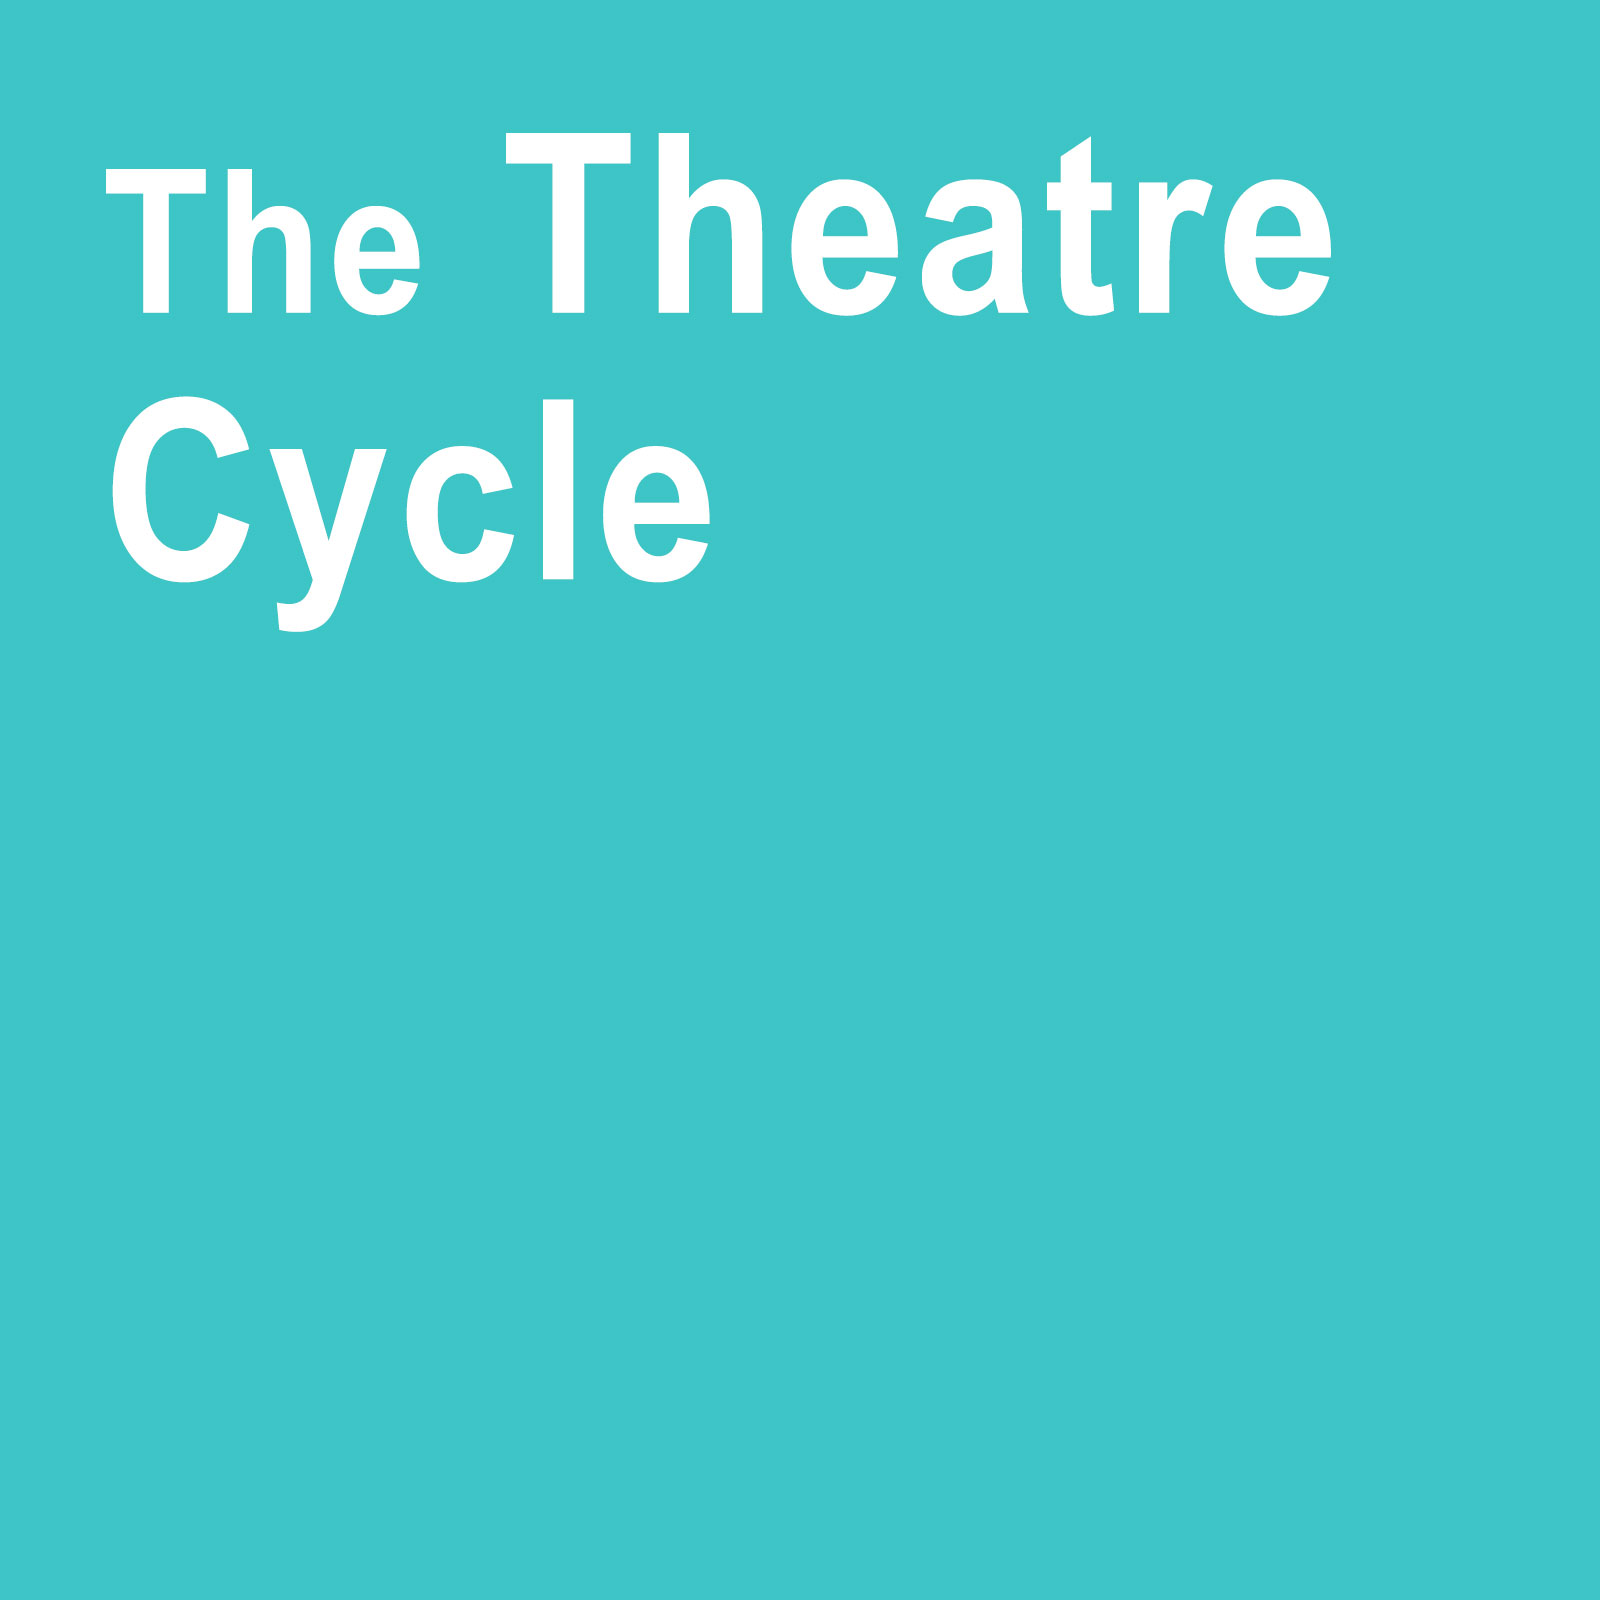 The Theatre Cycle